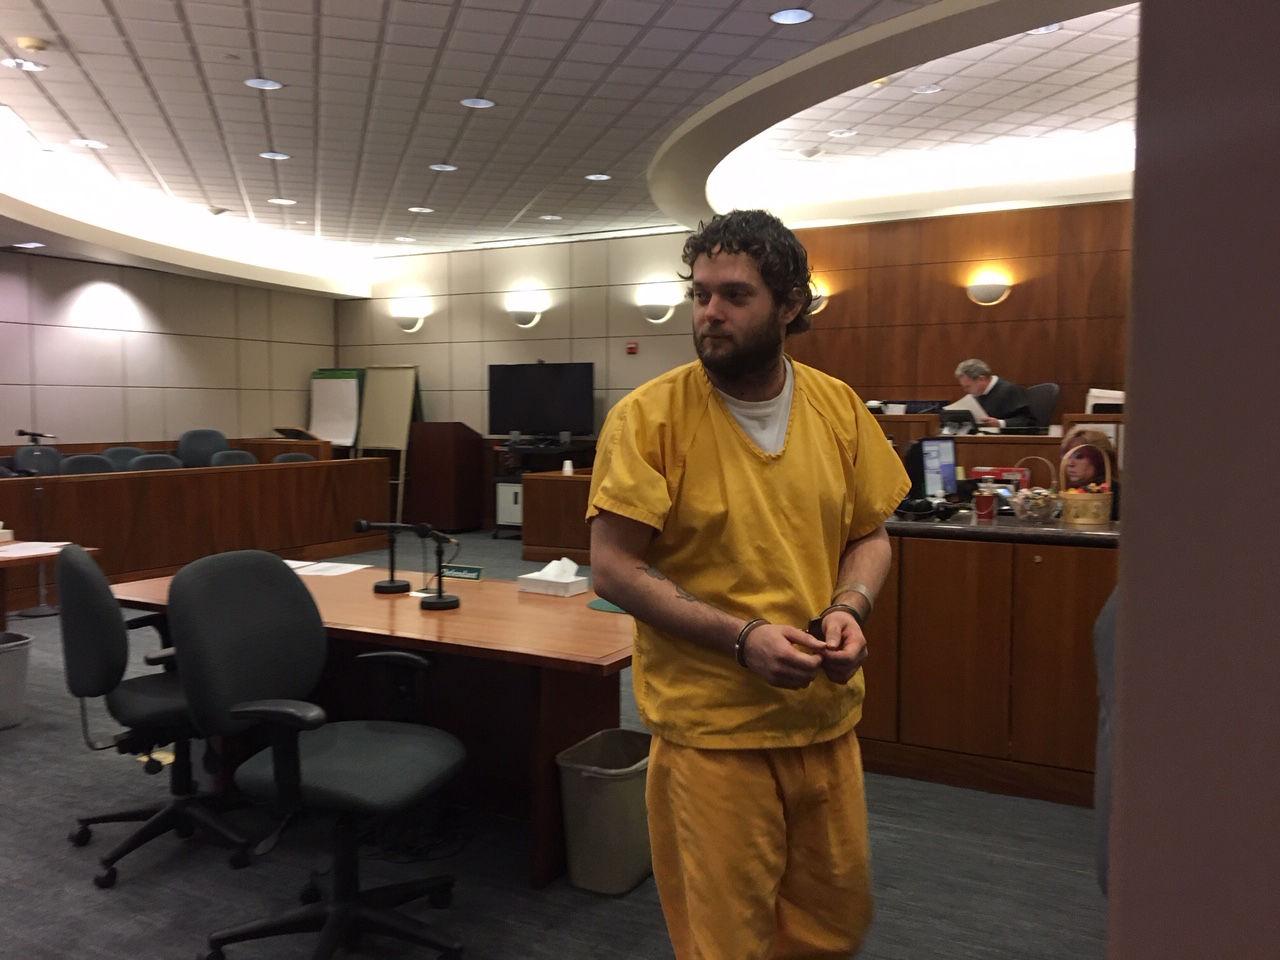 Fairbanks man sentenced to 190 days for multiple thefts Local News